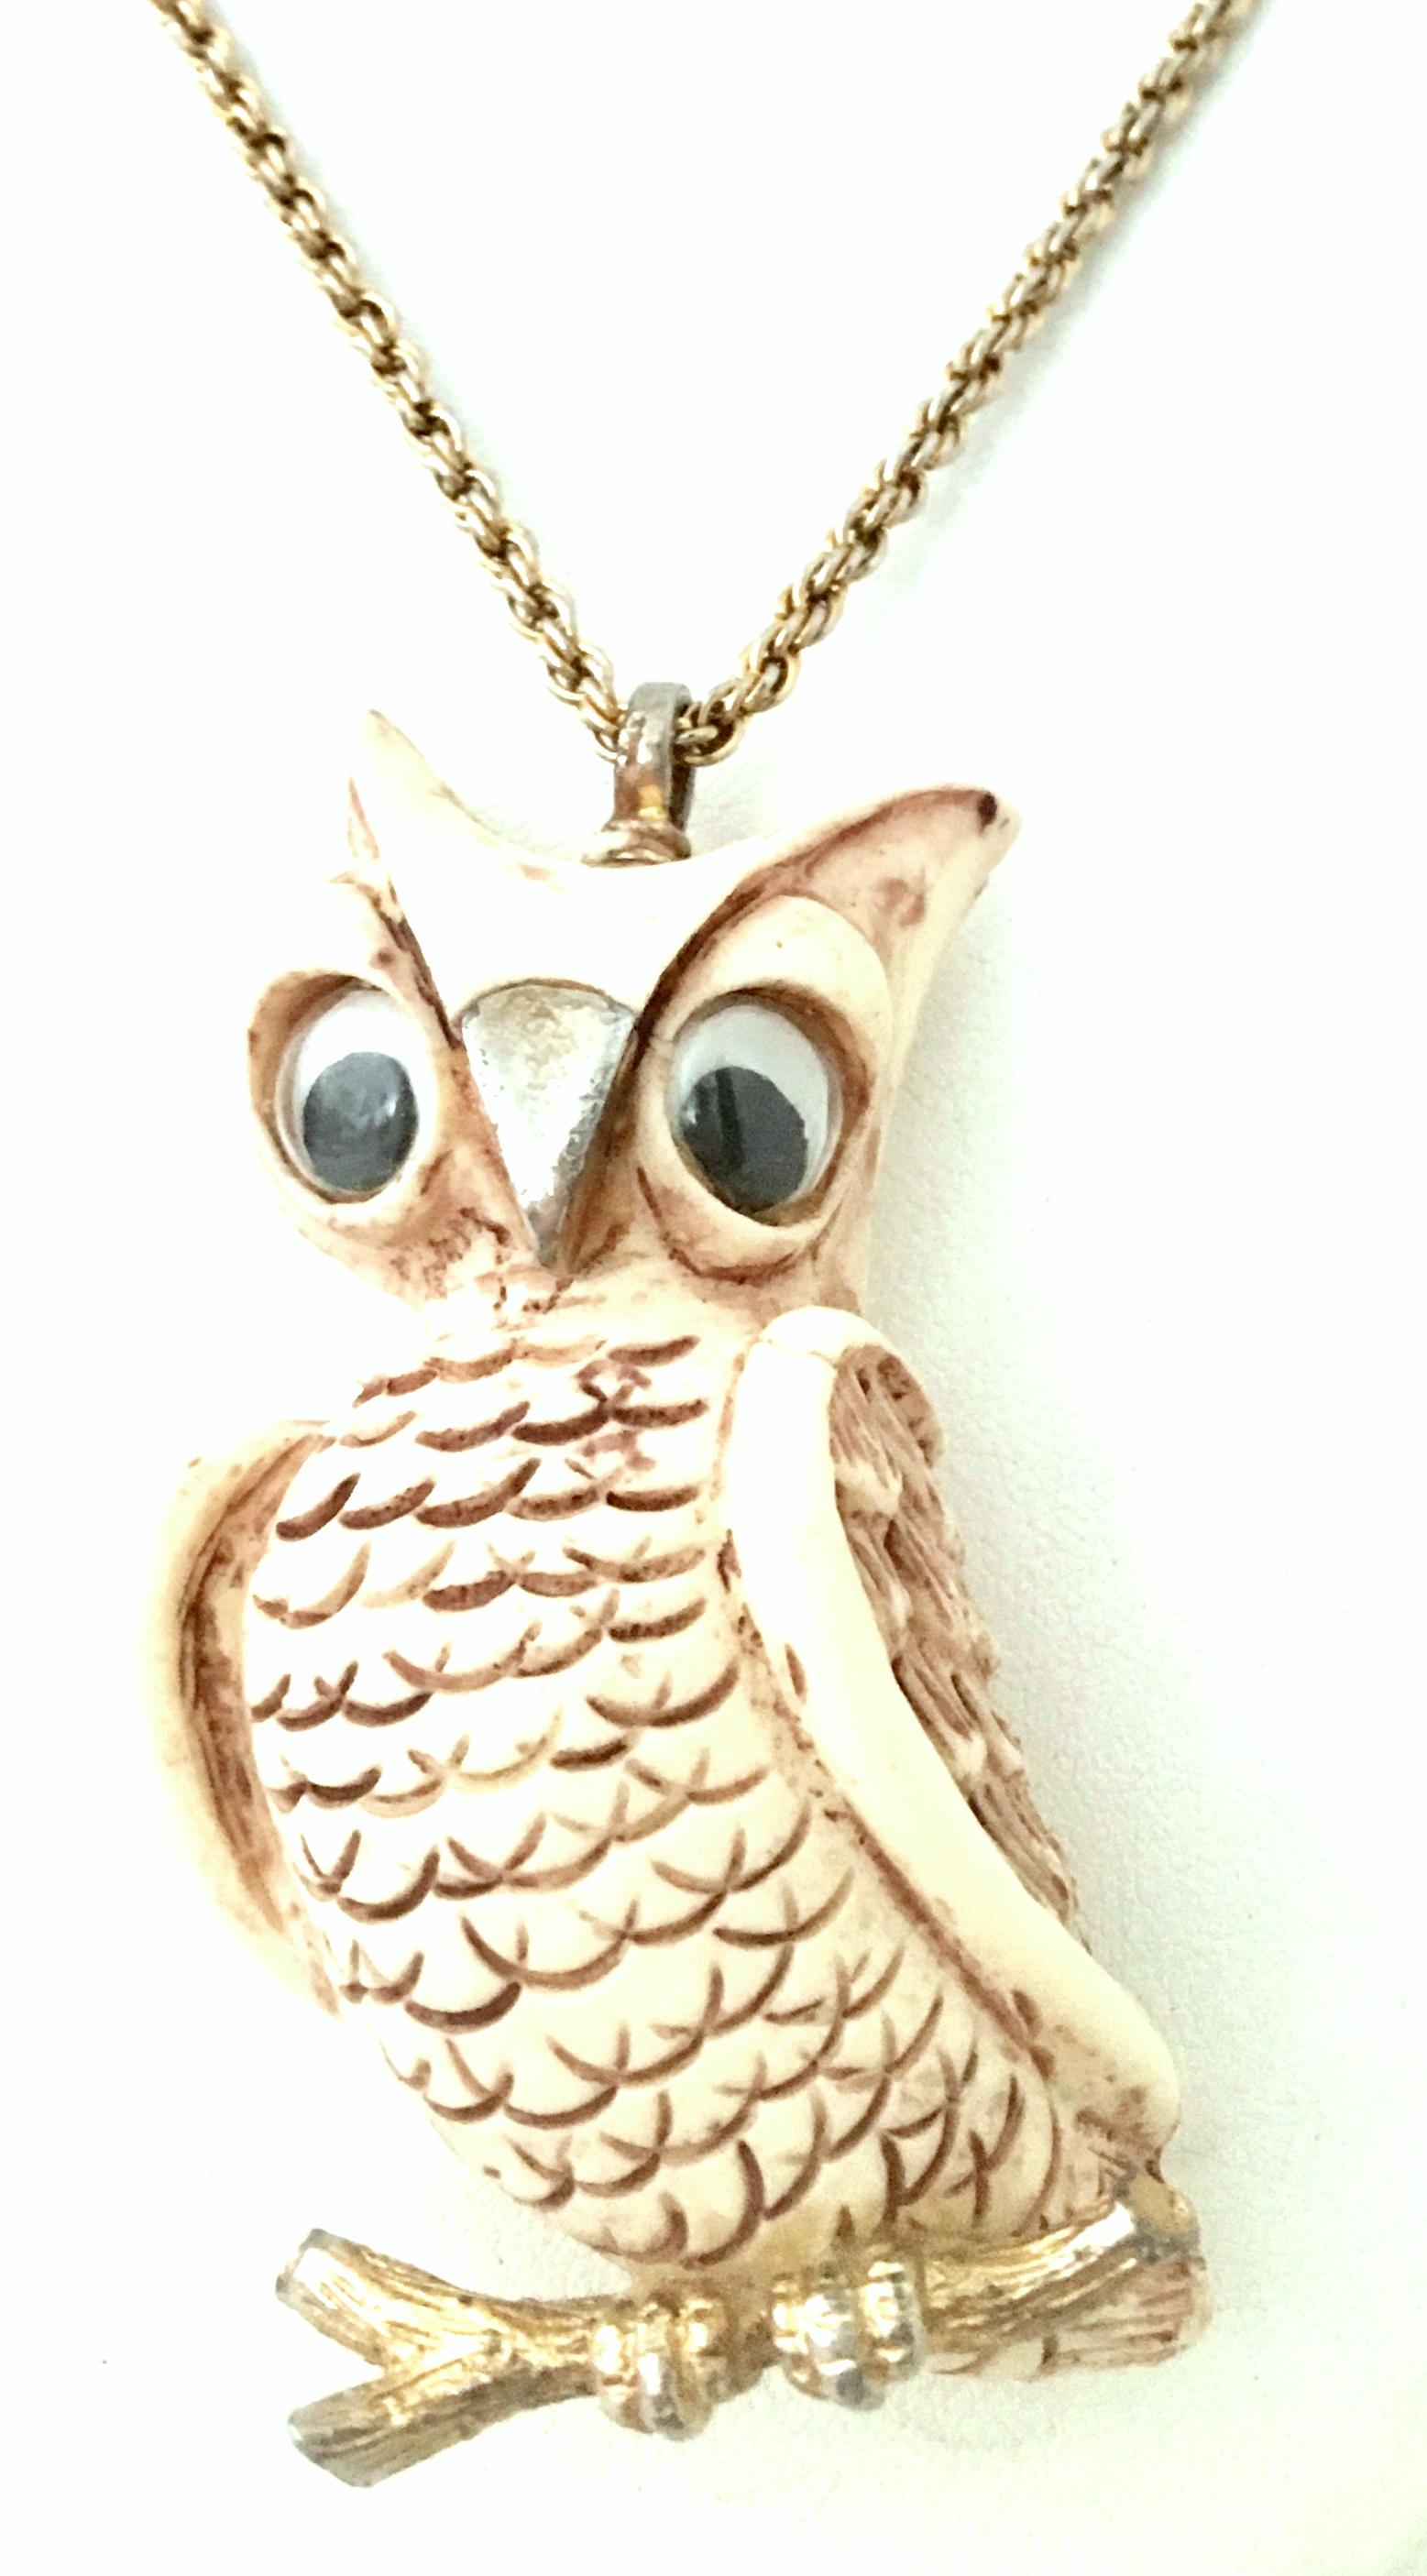 Women's or Men's 70'S Gold & Resin Carved Owl Pendant Necklace By Luca Razza For Sale